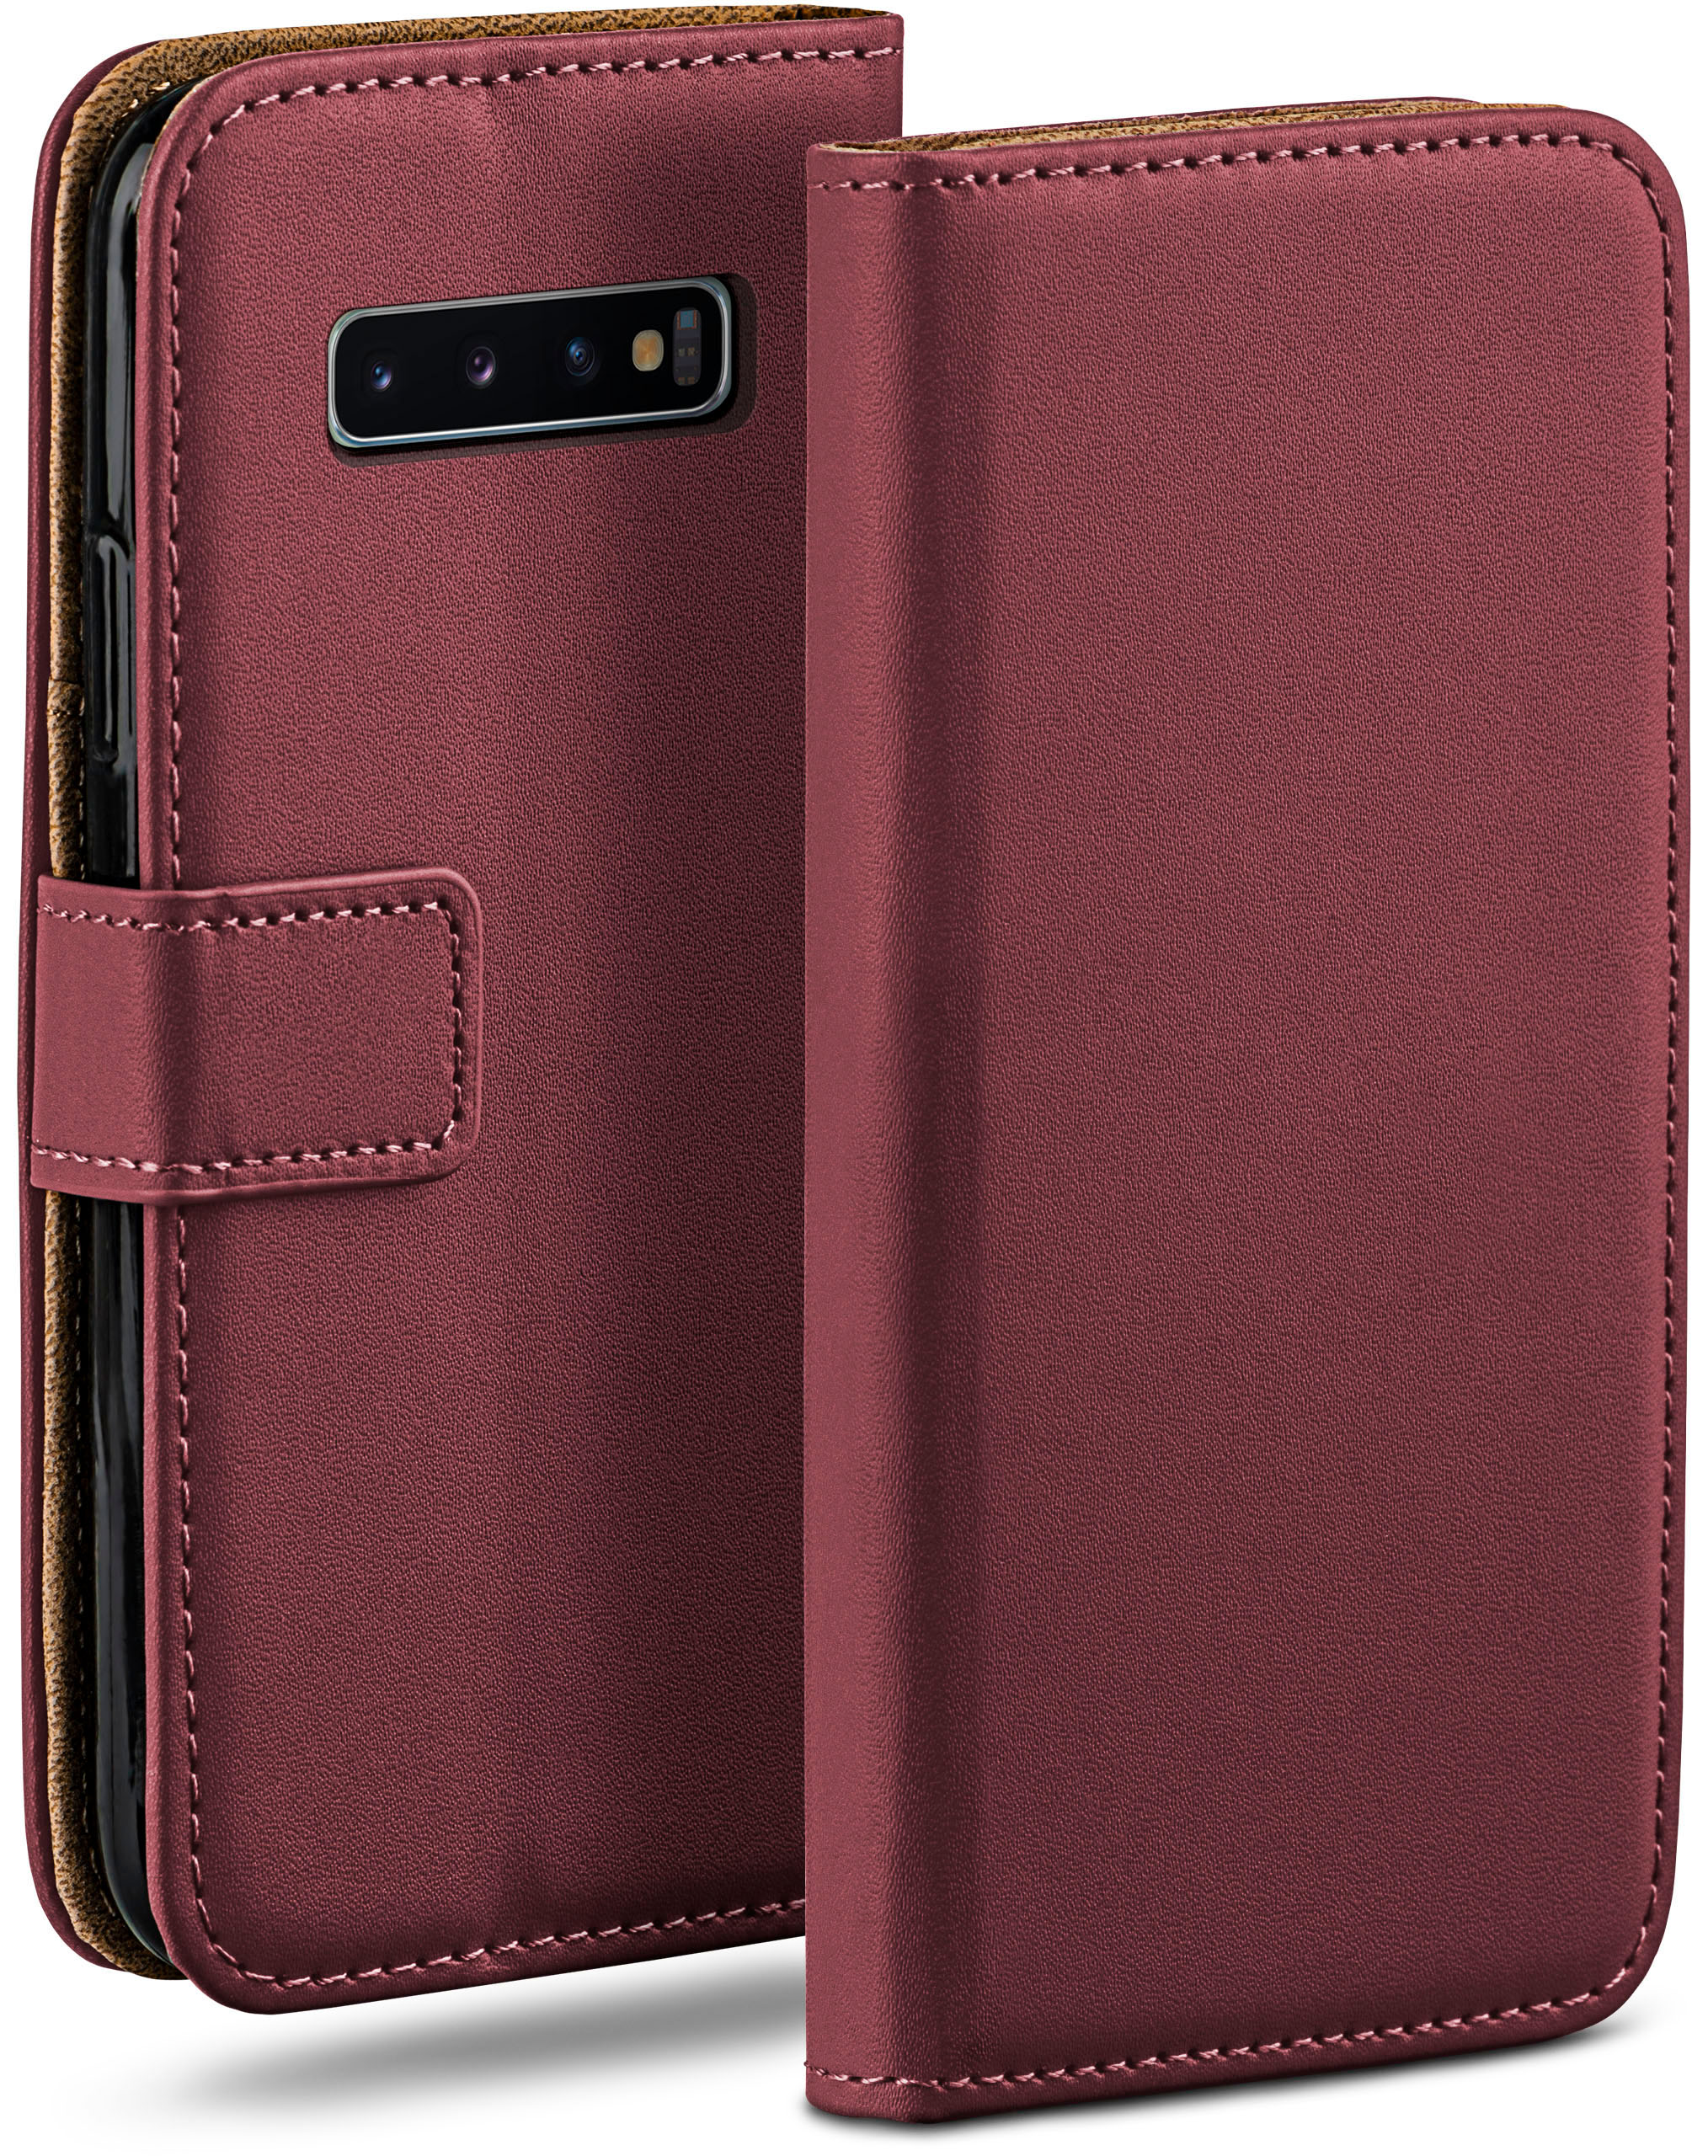 MOEX Book Samsung, S10, Bookcover, Galaxy Case, Maroon-Red